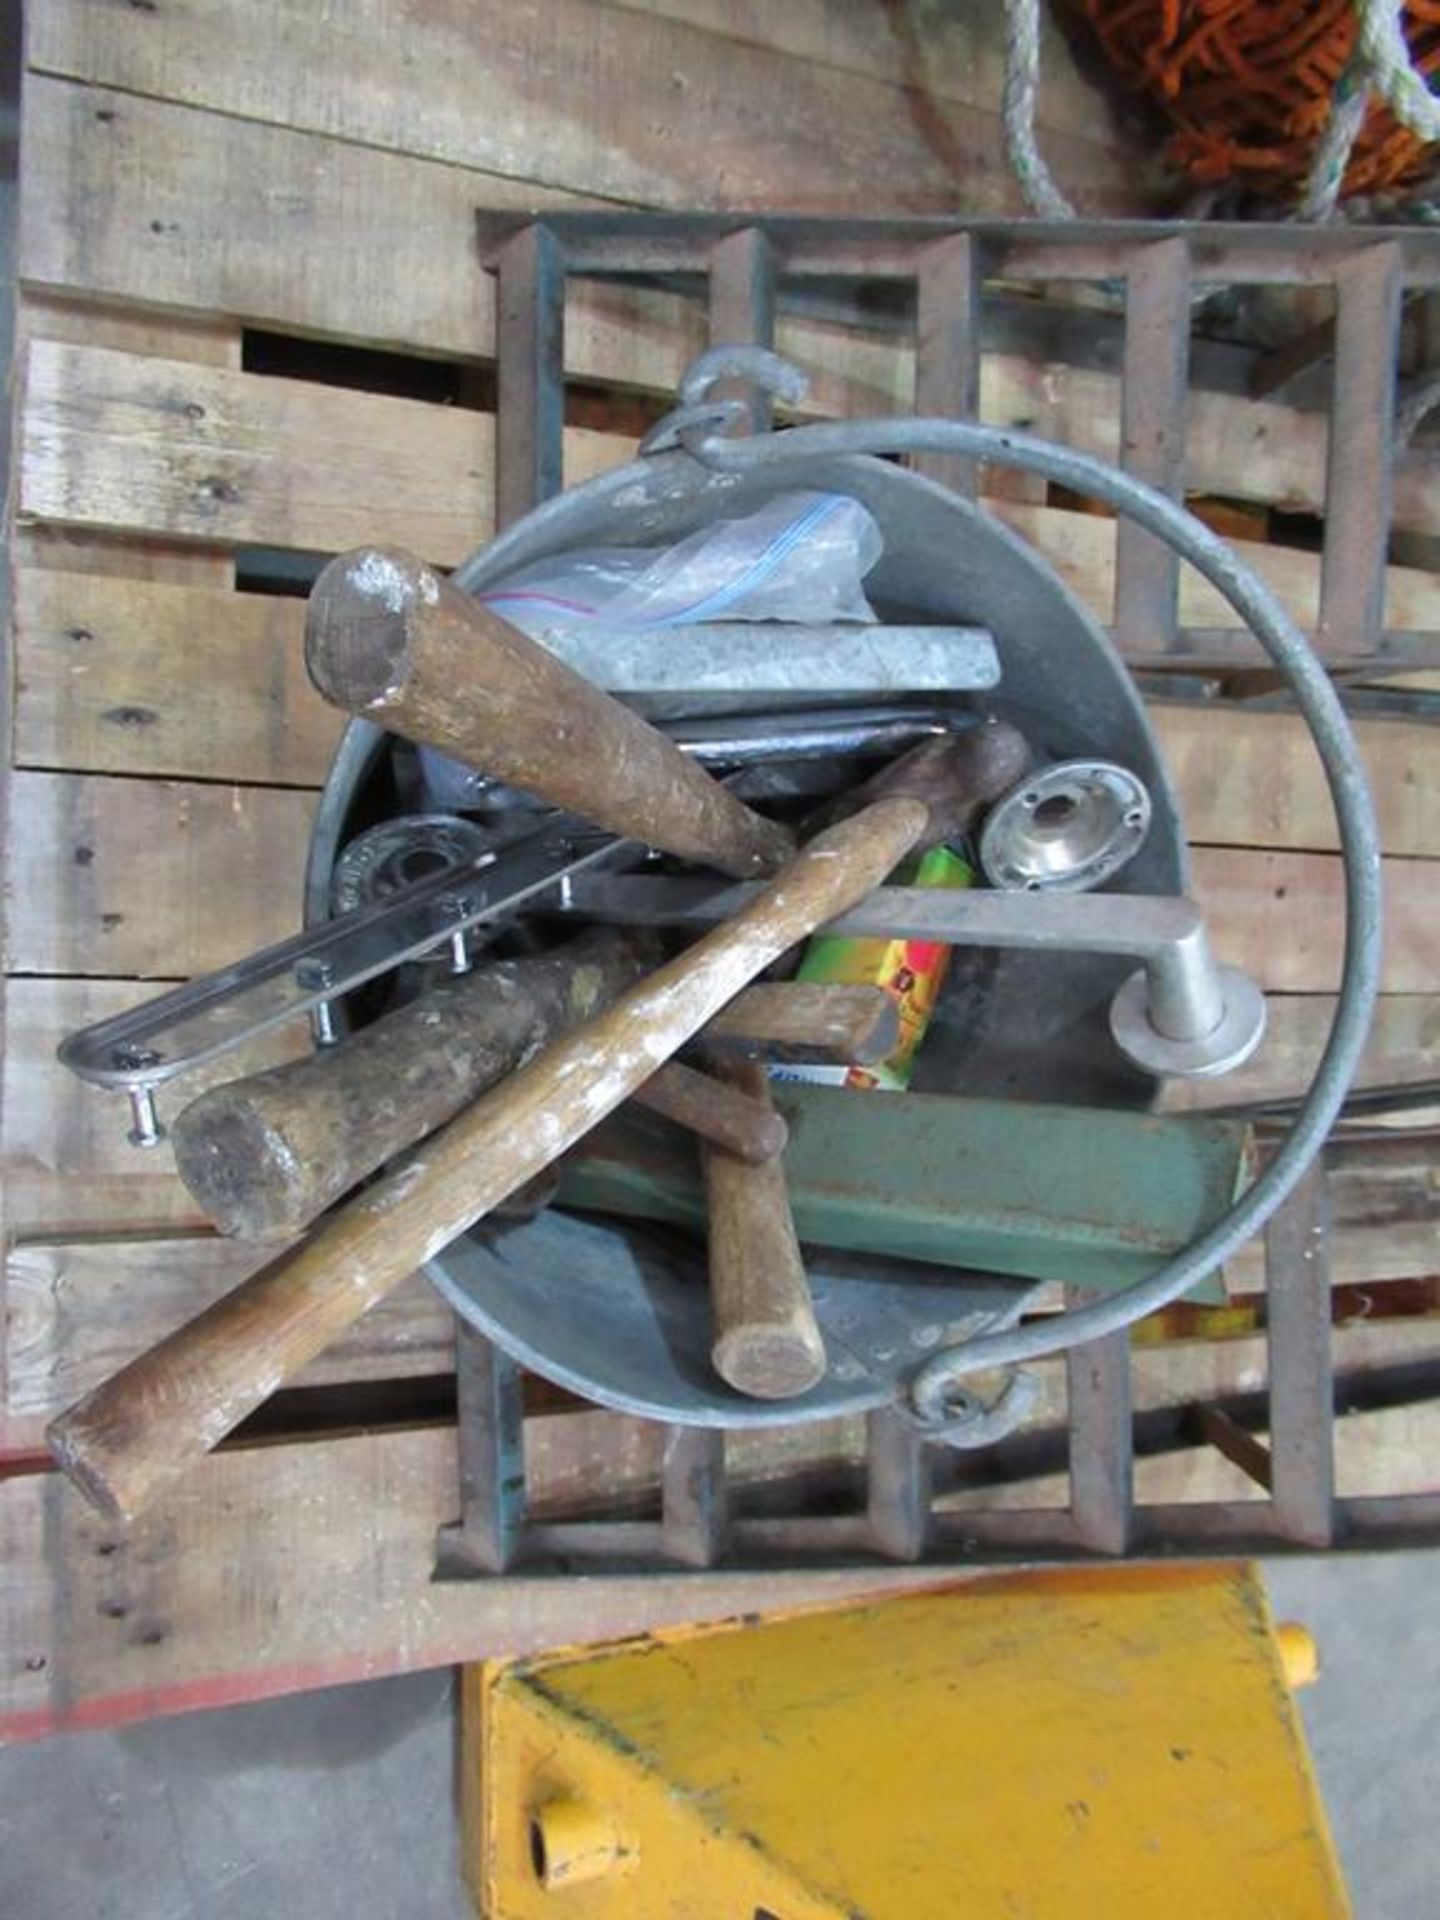 Pallet to contain bucket with various hand tools, two car ramps and goal netting - Image 2 of 3